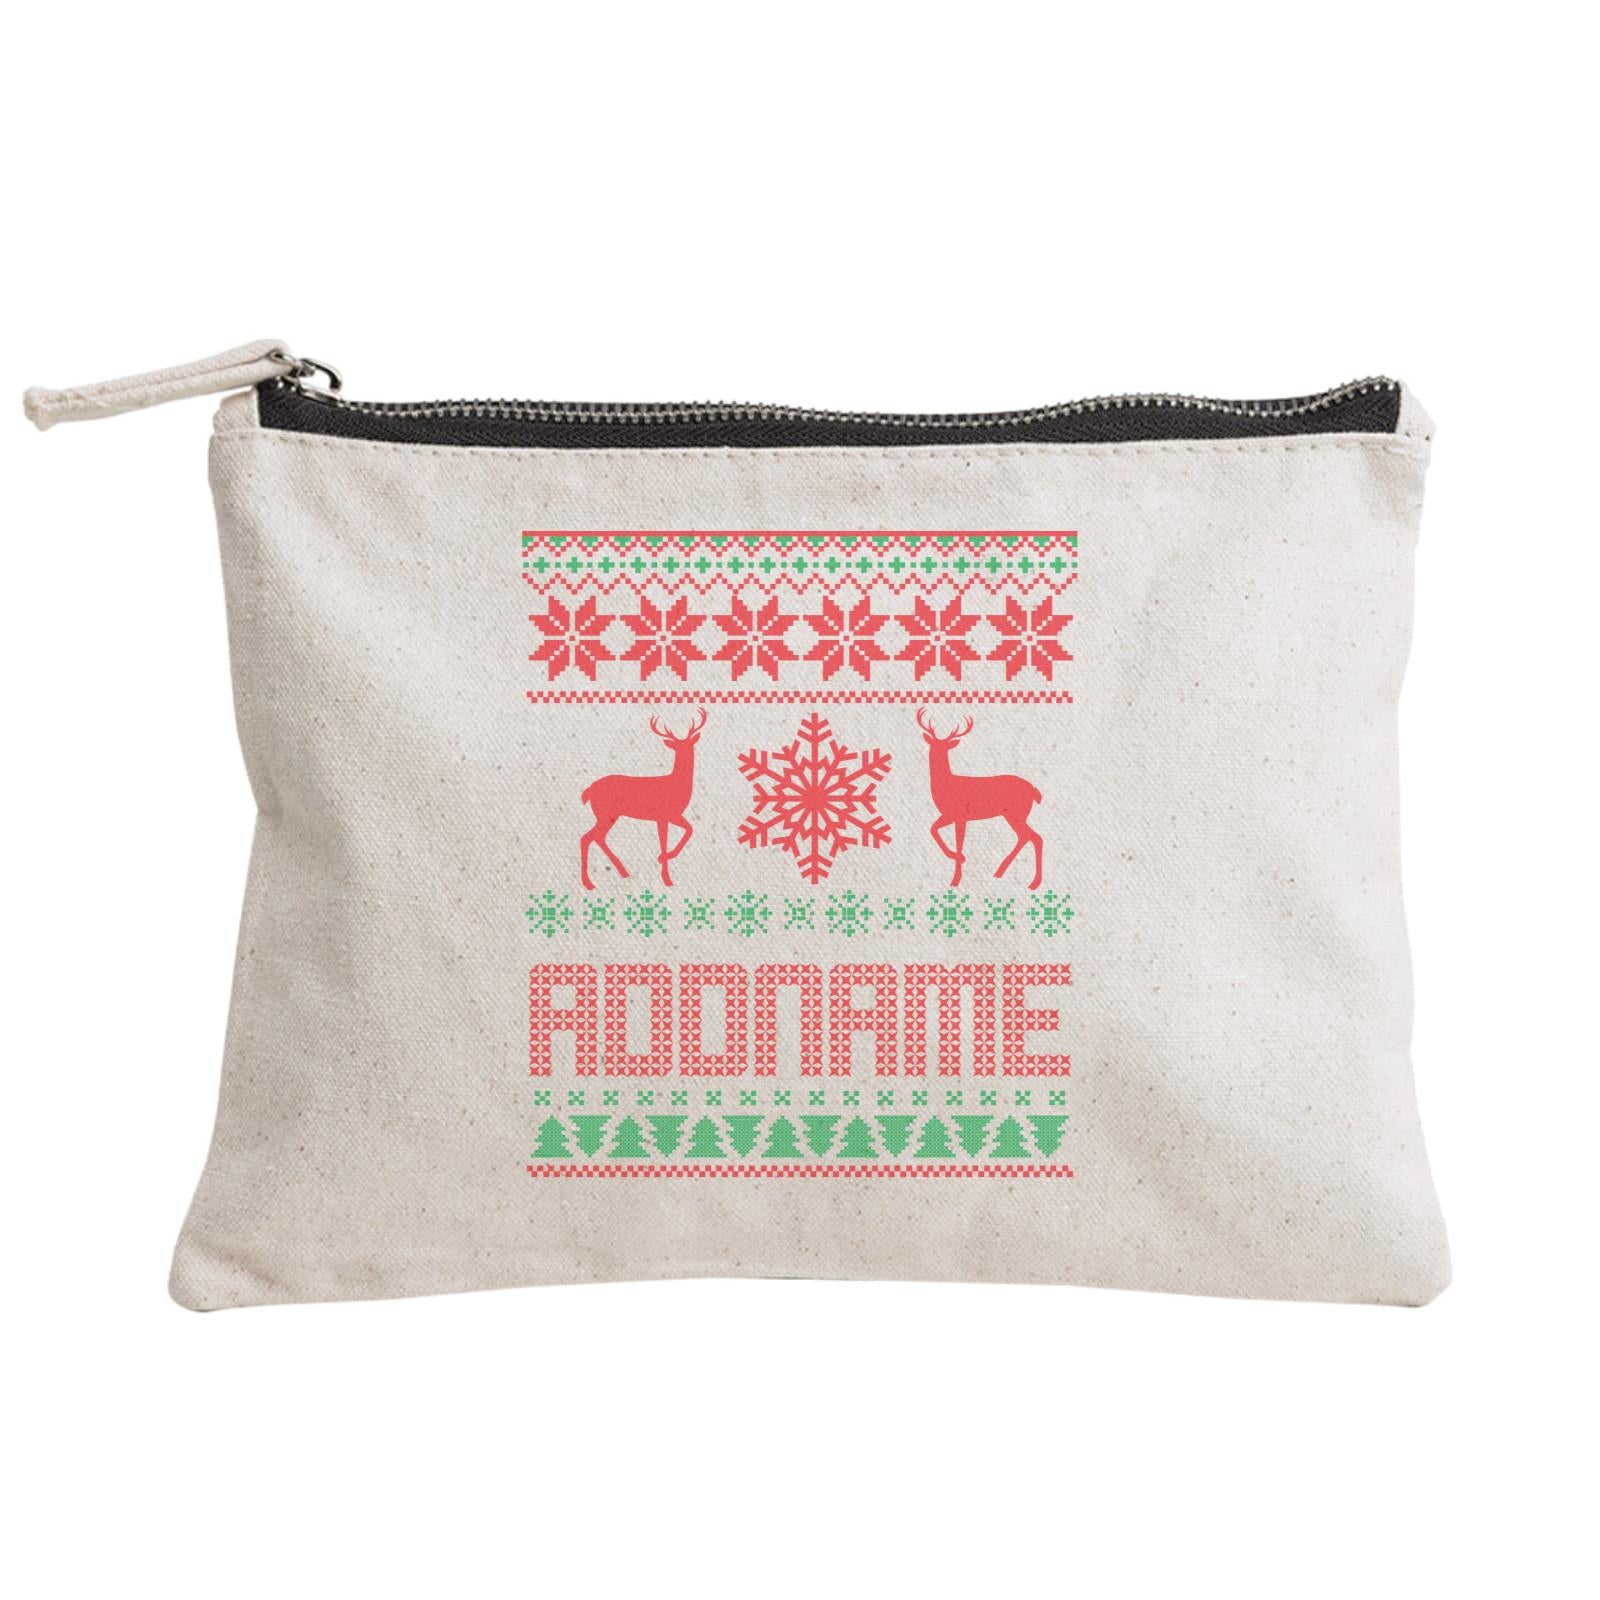 Christmas Series Sweater with Deer Zipper Pouch